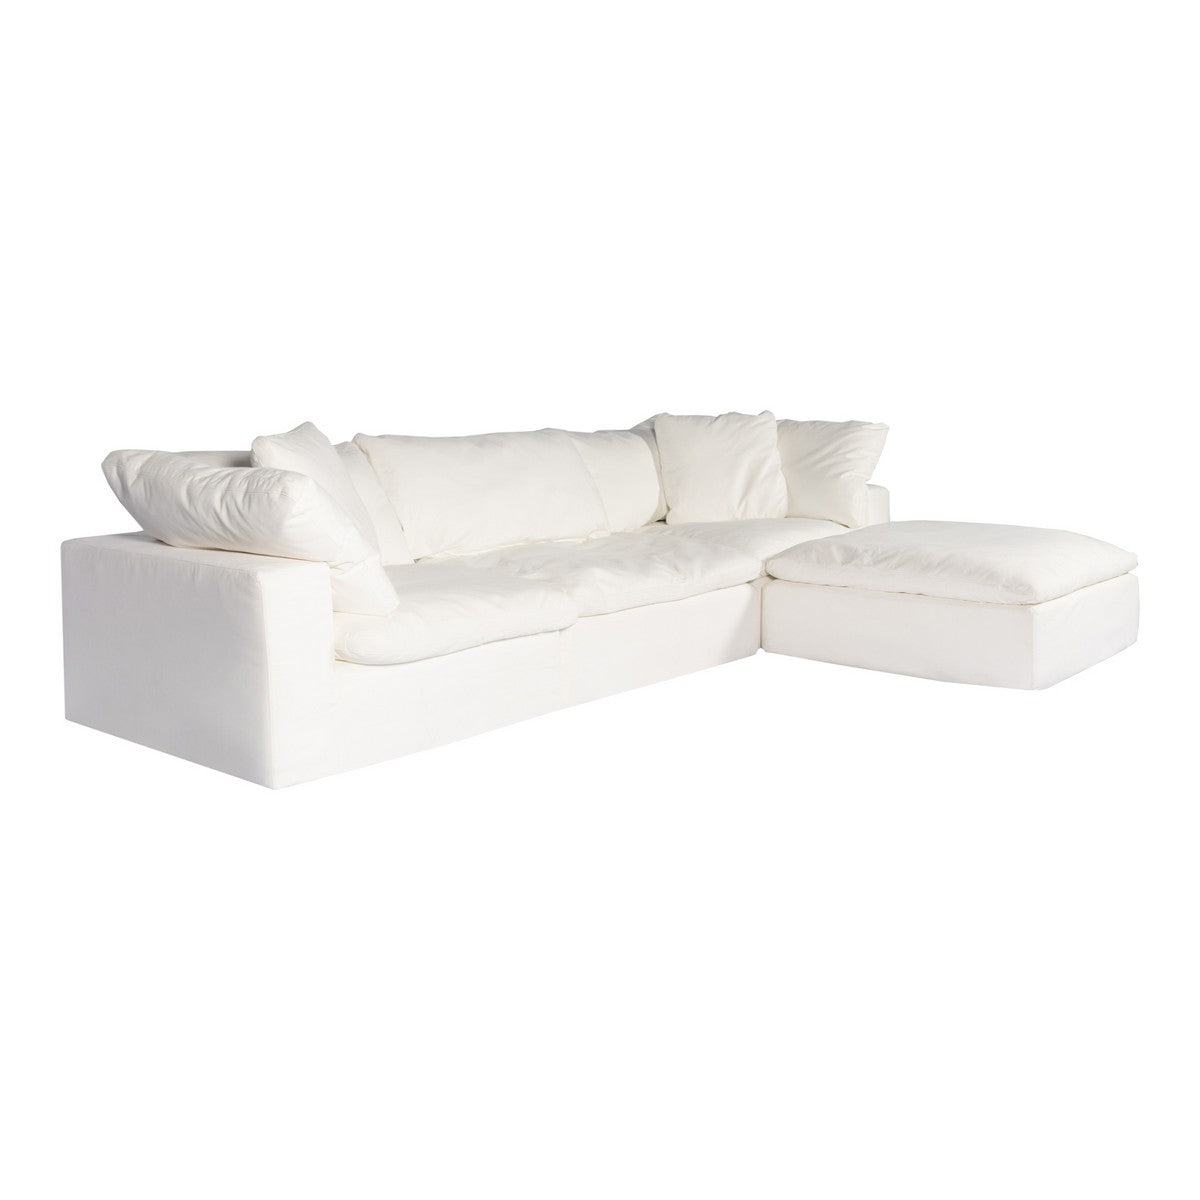 Moe's Home Collection Clay Lounge Modular Sectional Livesmart Fabric Cream - YJ-1008-05